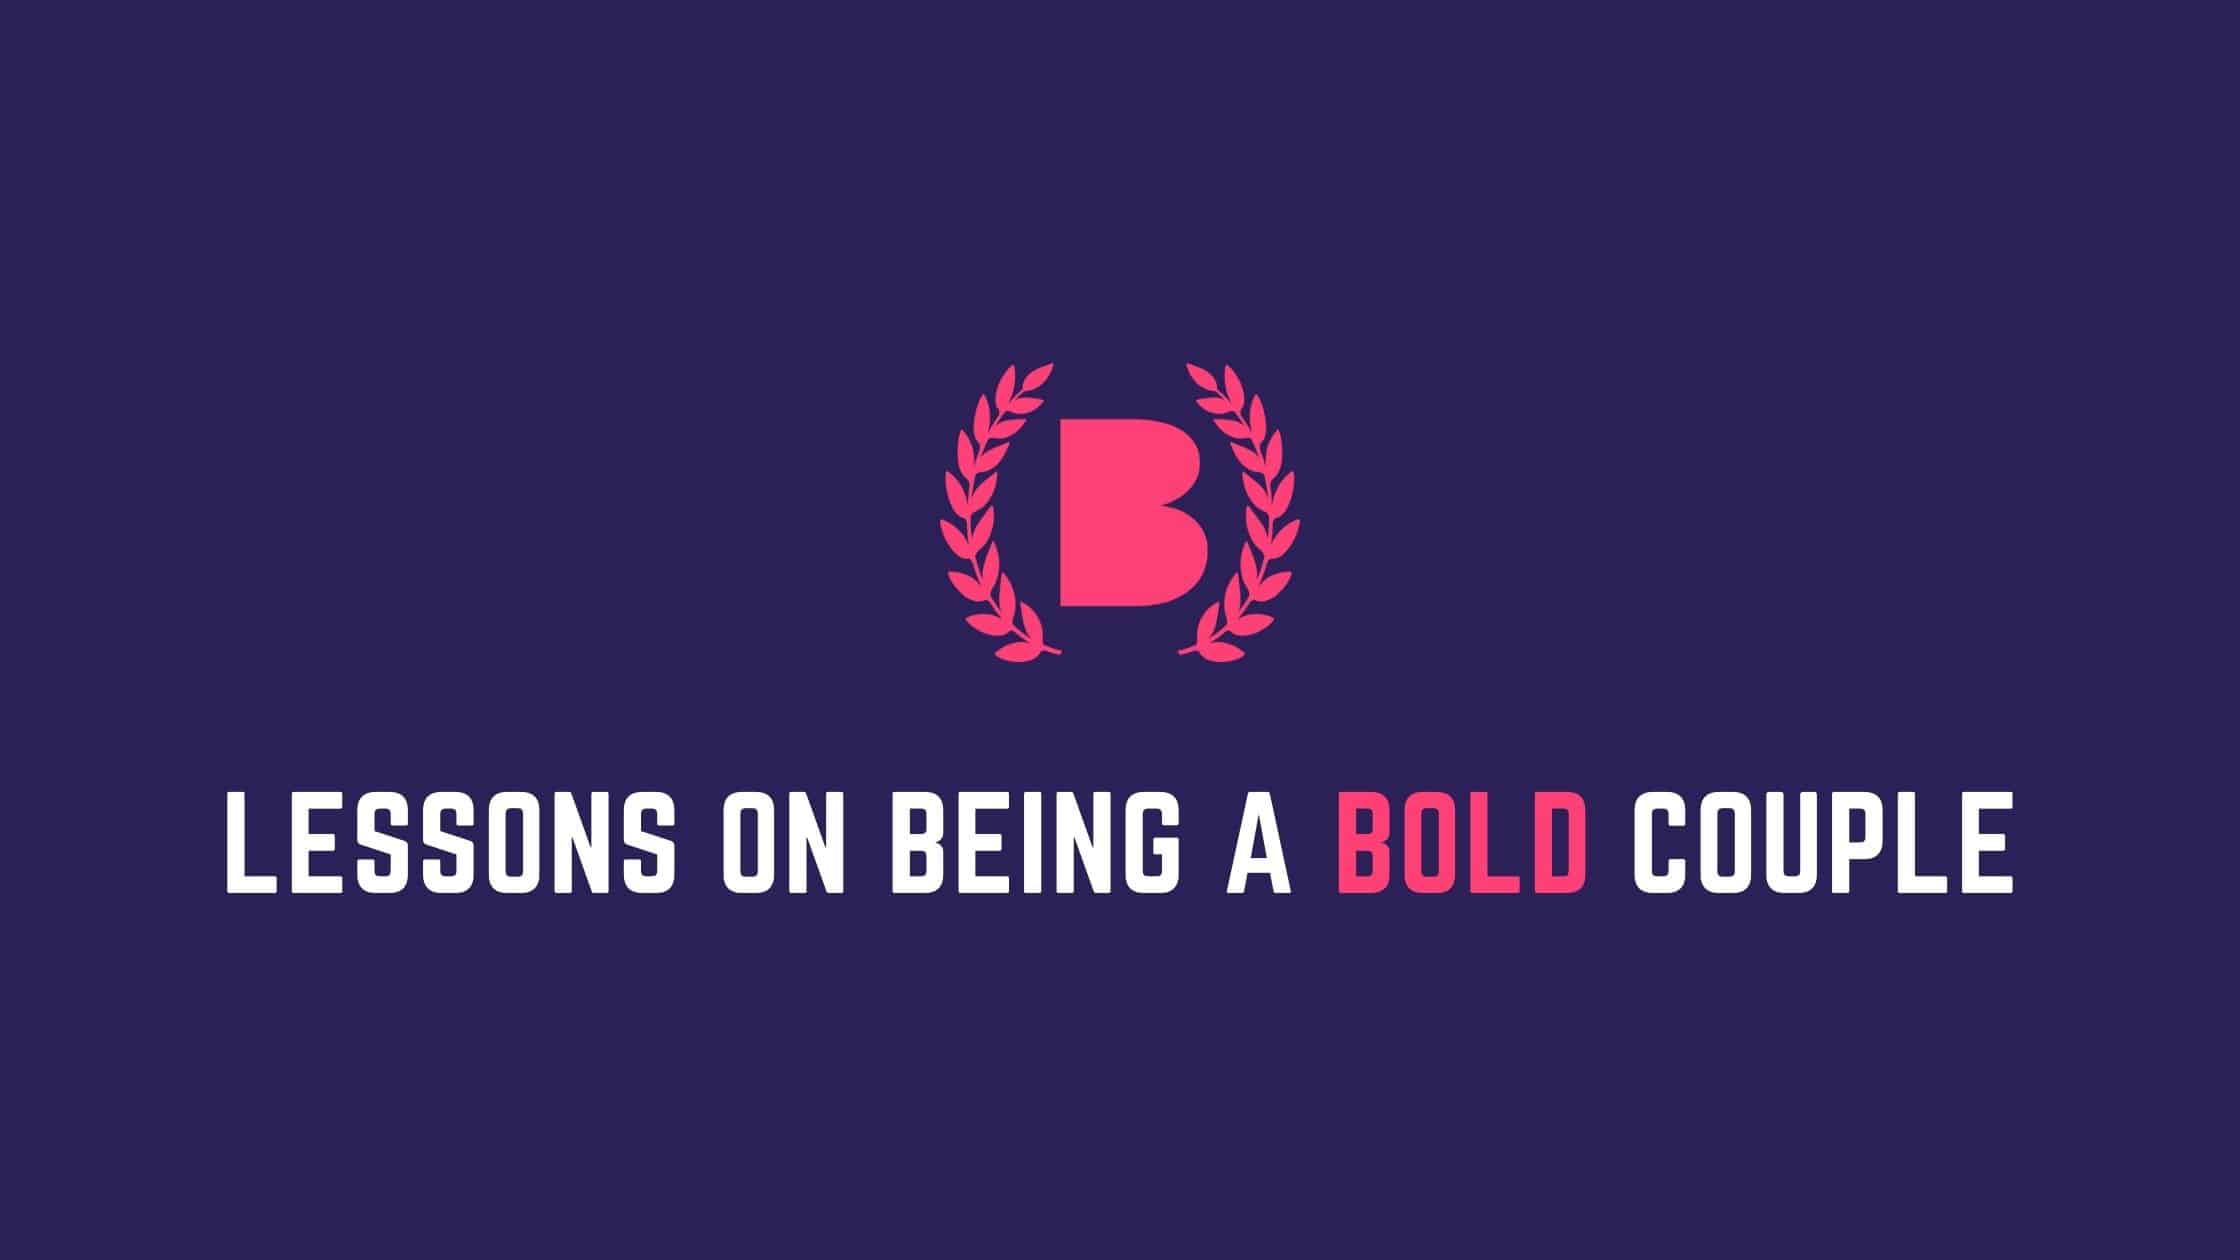 Learn to be bold from people who have shown boldness